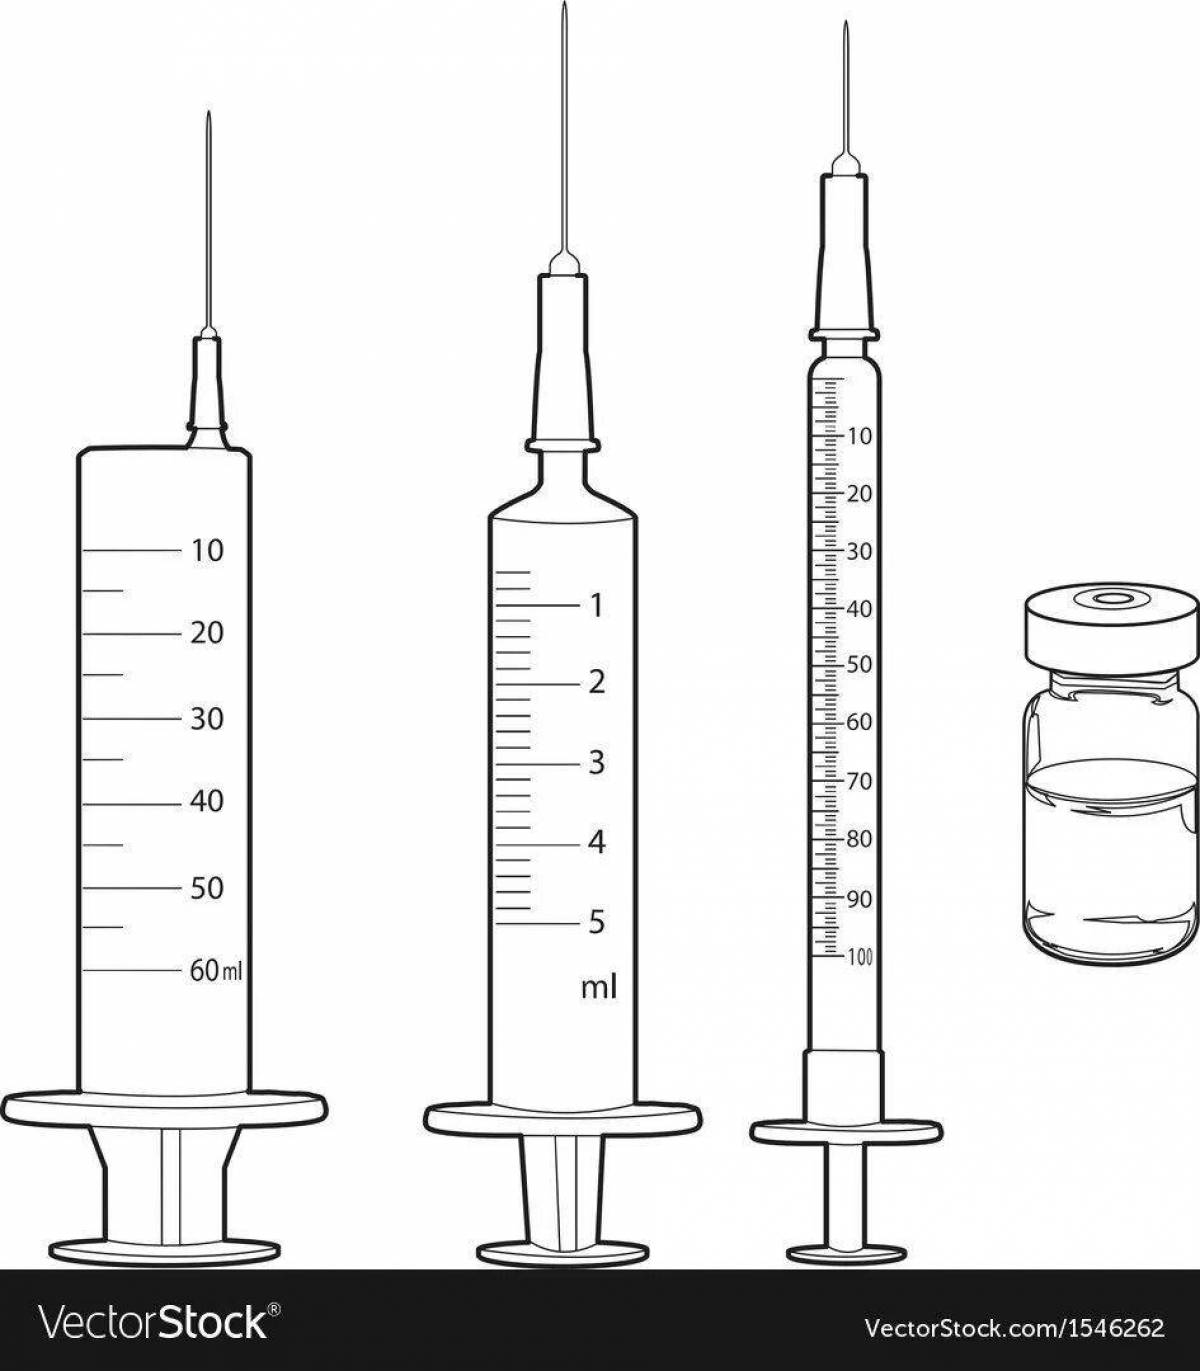 Syringe bright coloring page for little ones